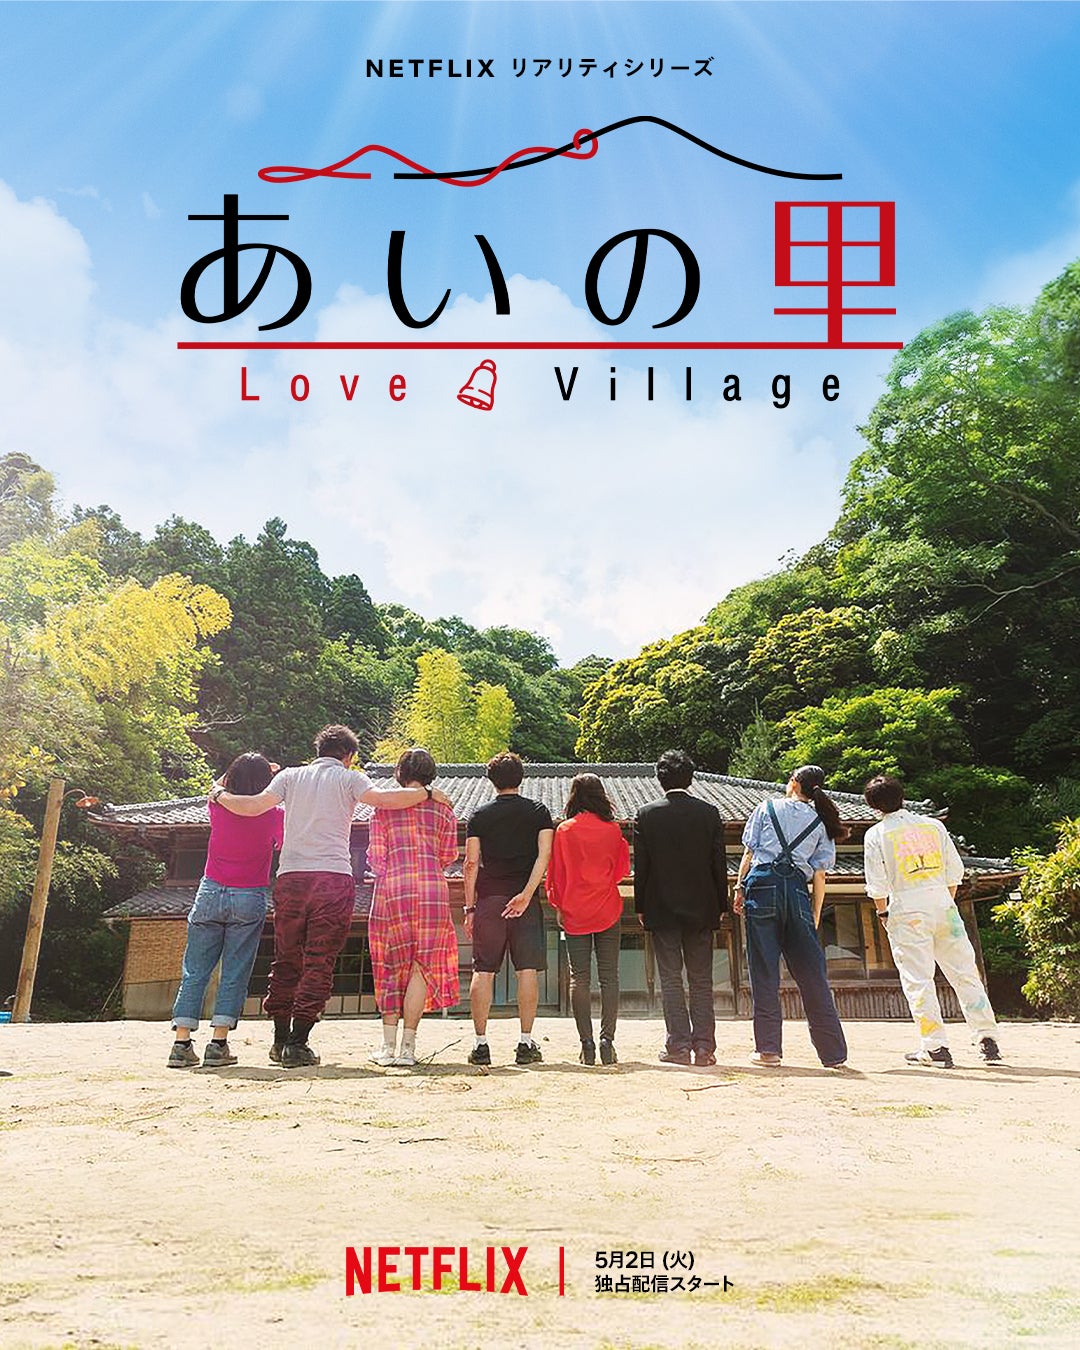 TV ratings for Love Village (あいの里) in los Reino Unido. Netflix TV series